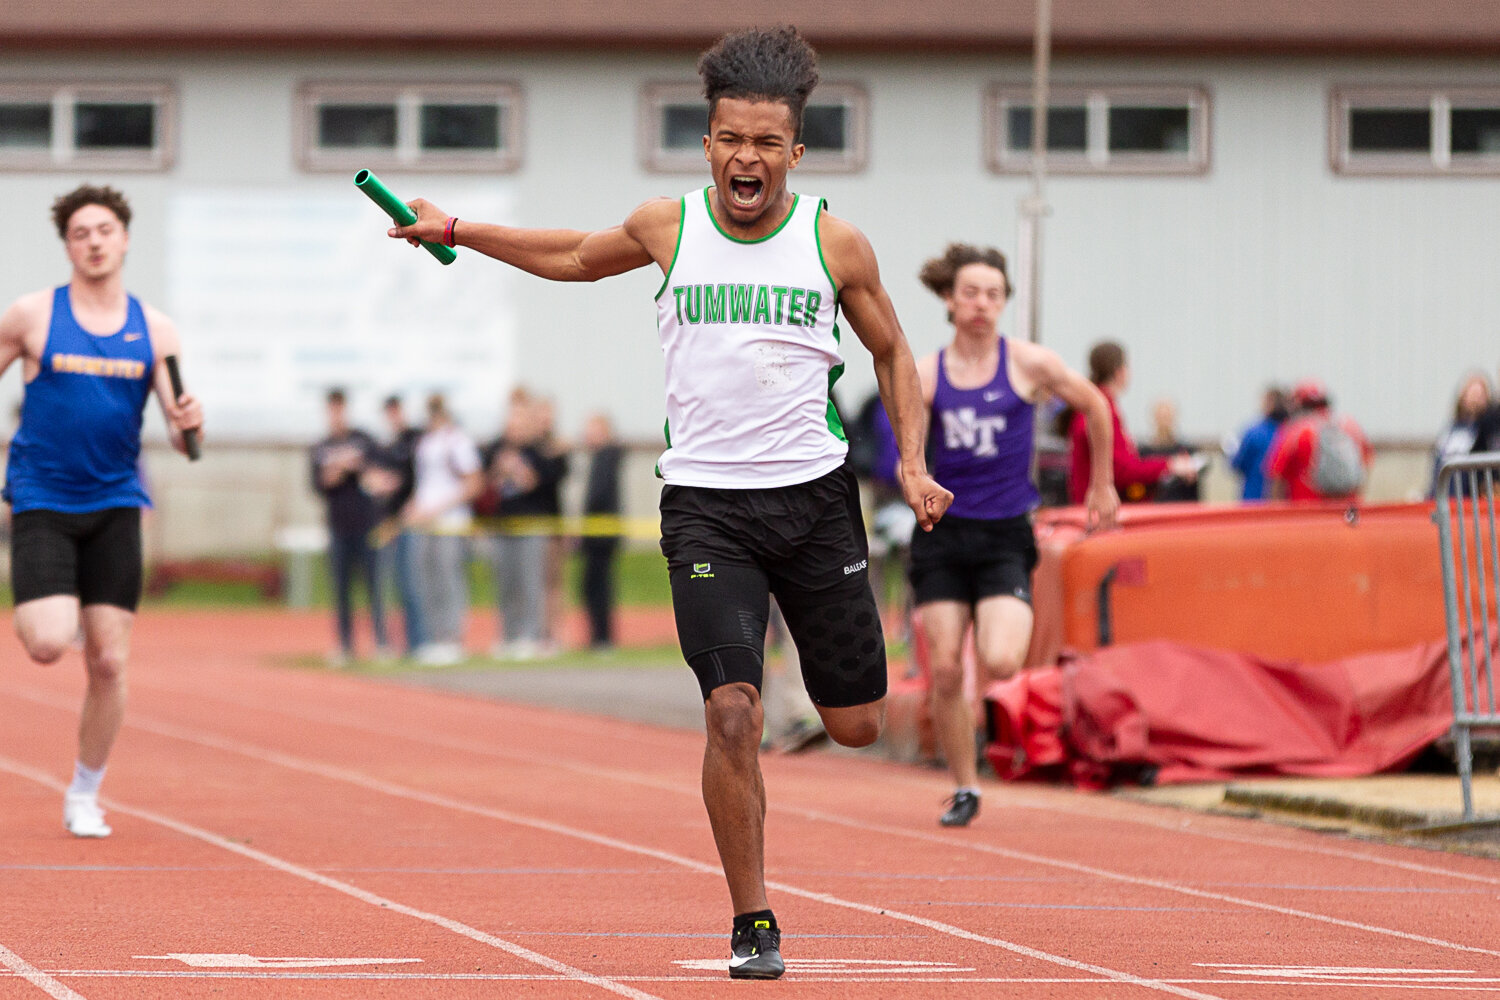 Tumwater's Jaxon Budd yells as he crosses the finish line in the 4x100-meter relay at the Chehalis Activators Classic April 22 at W.F. West.